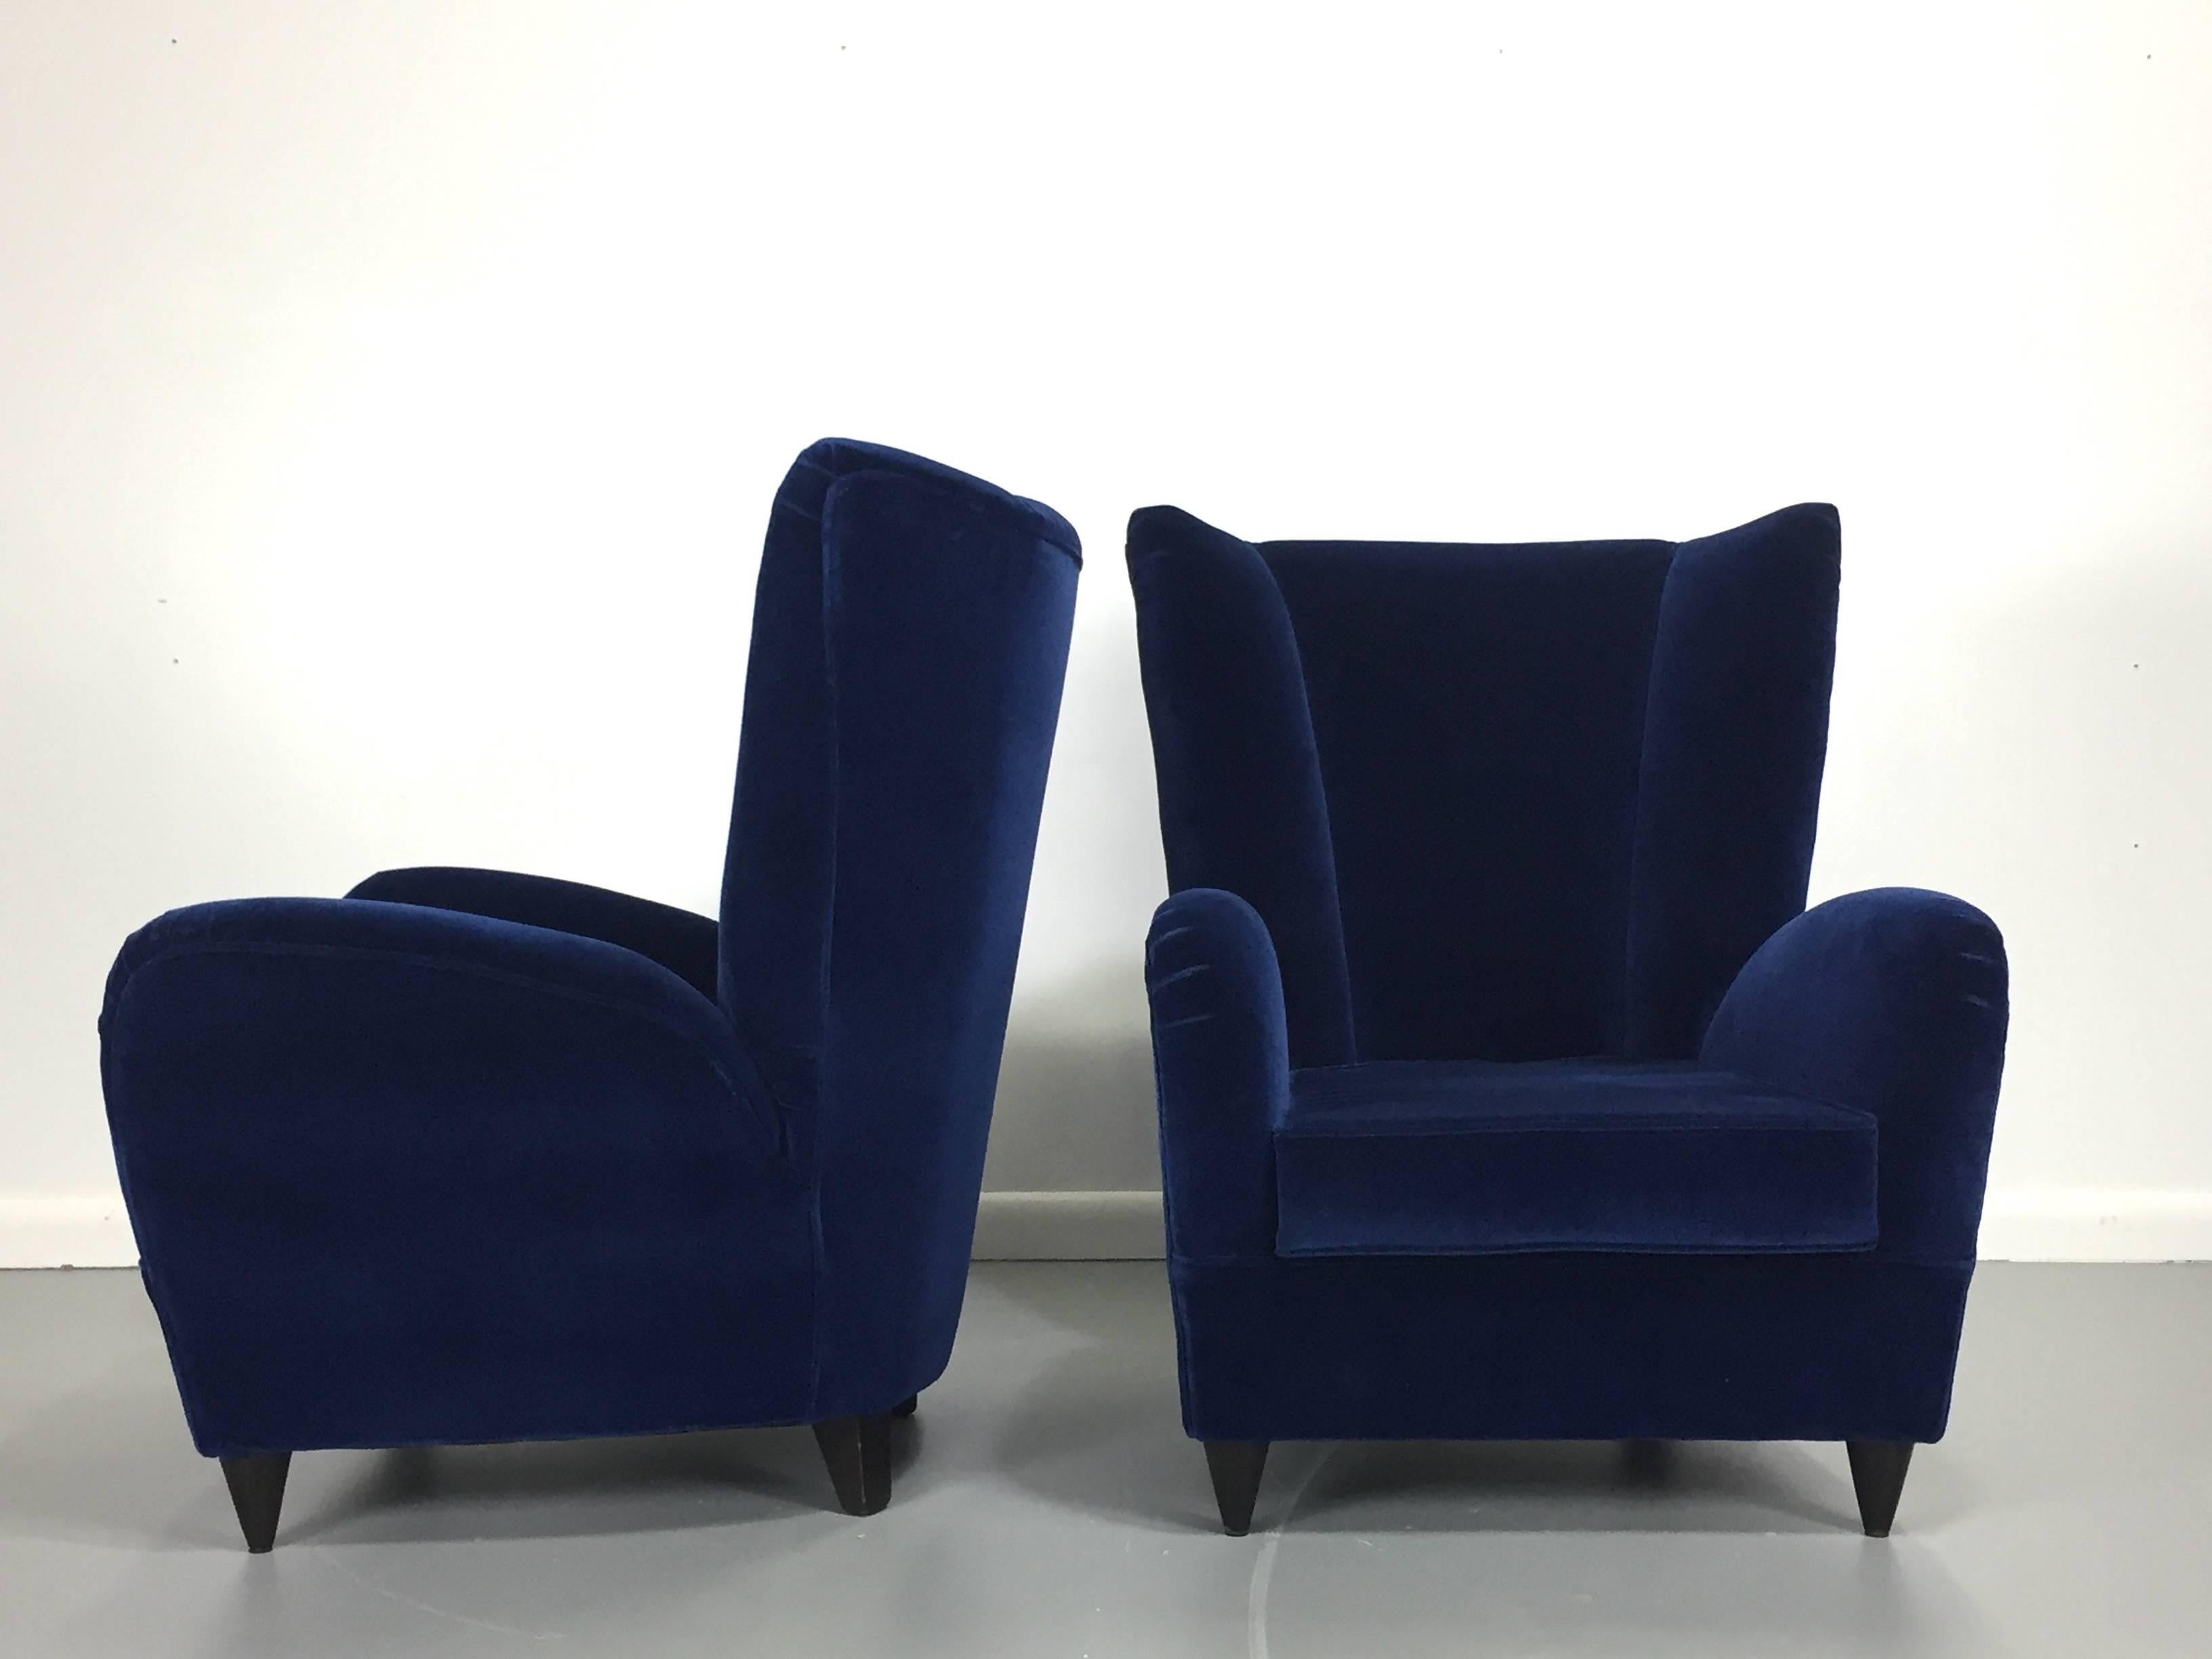 Upholstery Paola Buffa Lounge Chairs in Navy Velvet, a Pair